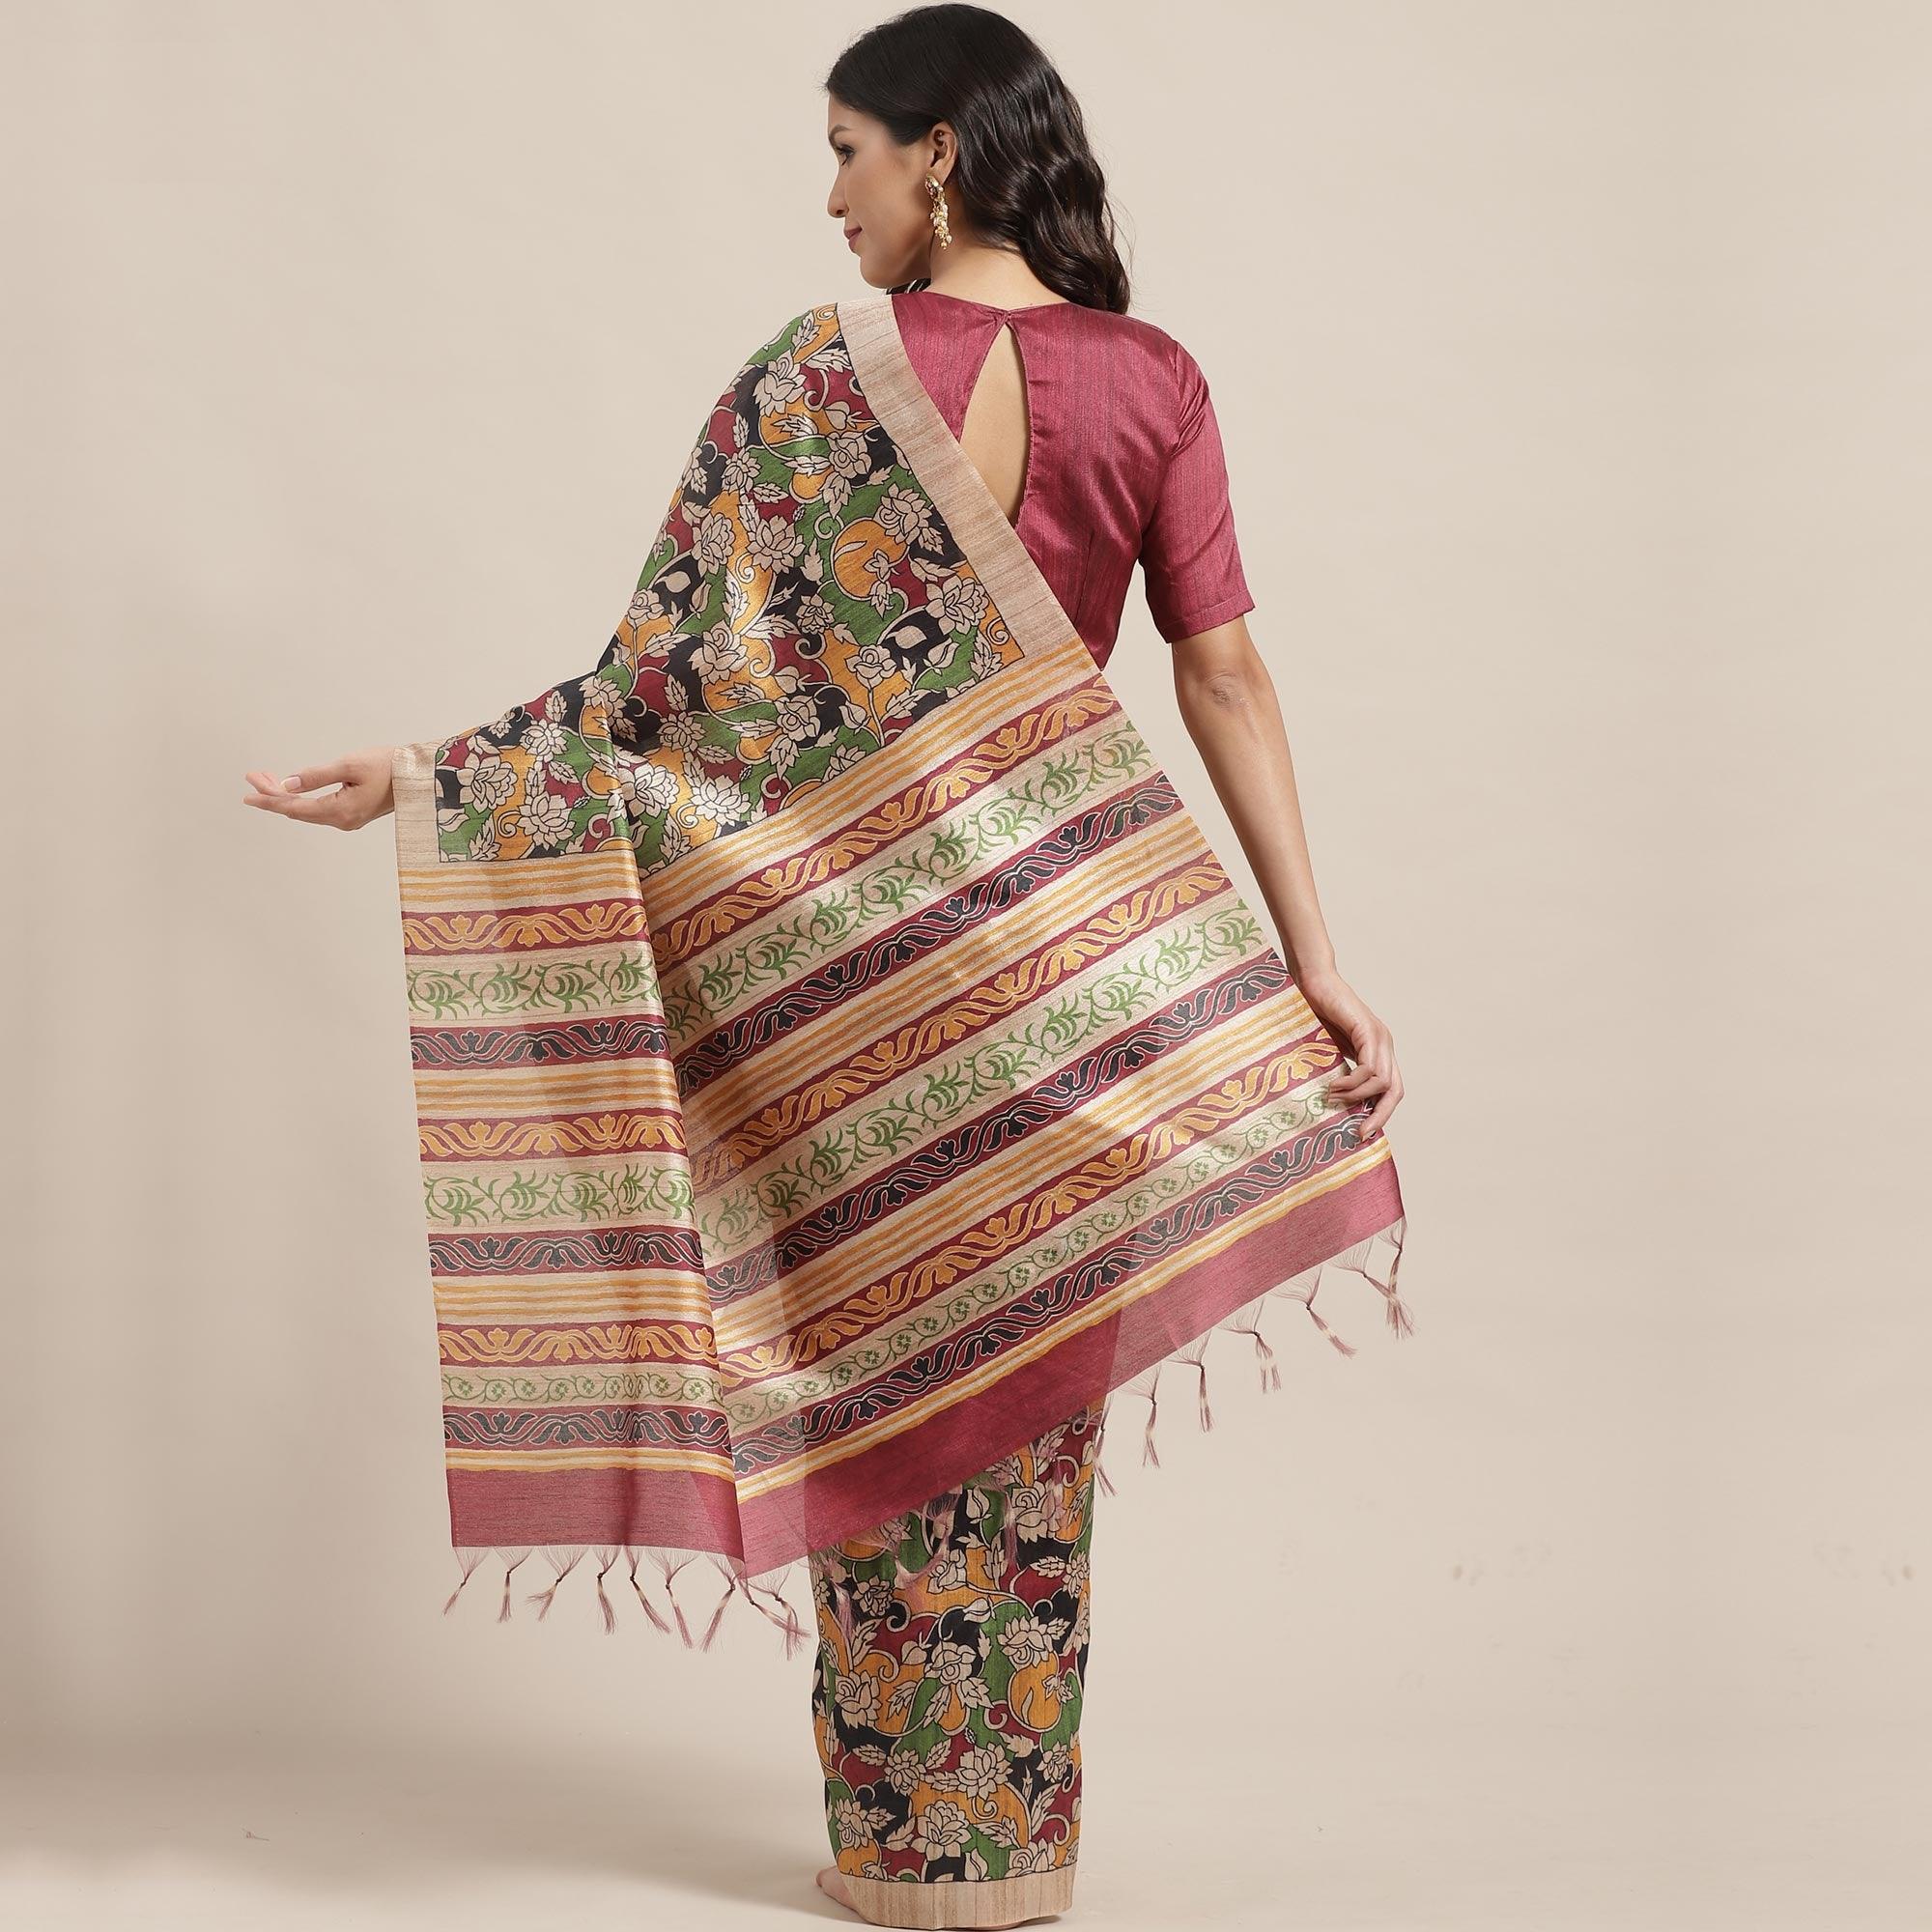 Glowing Beige-Multi Colored Casual Wear Floral Printed Silk Blend Saree With Tassels - Peachmode